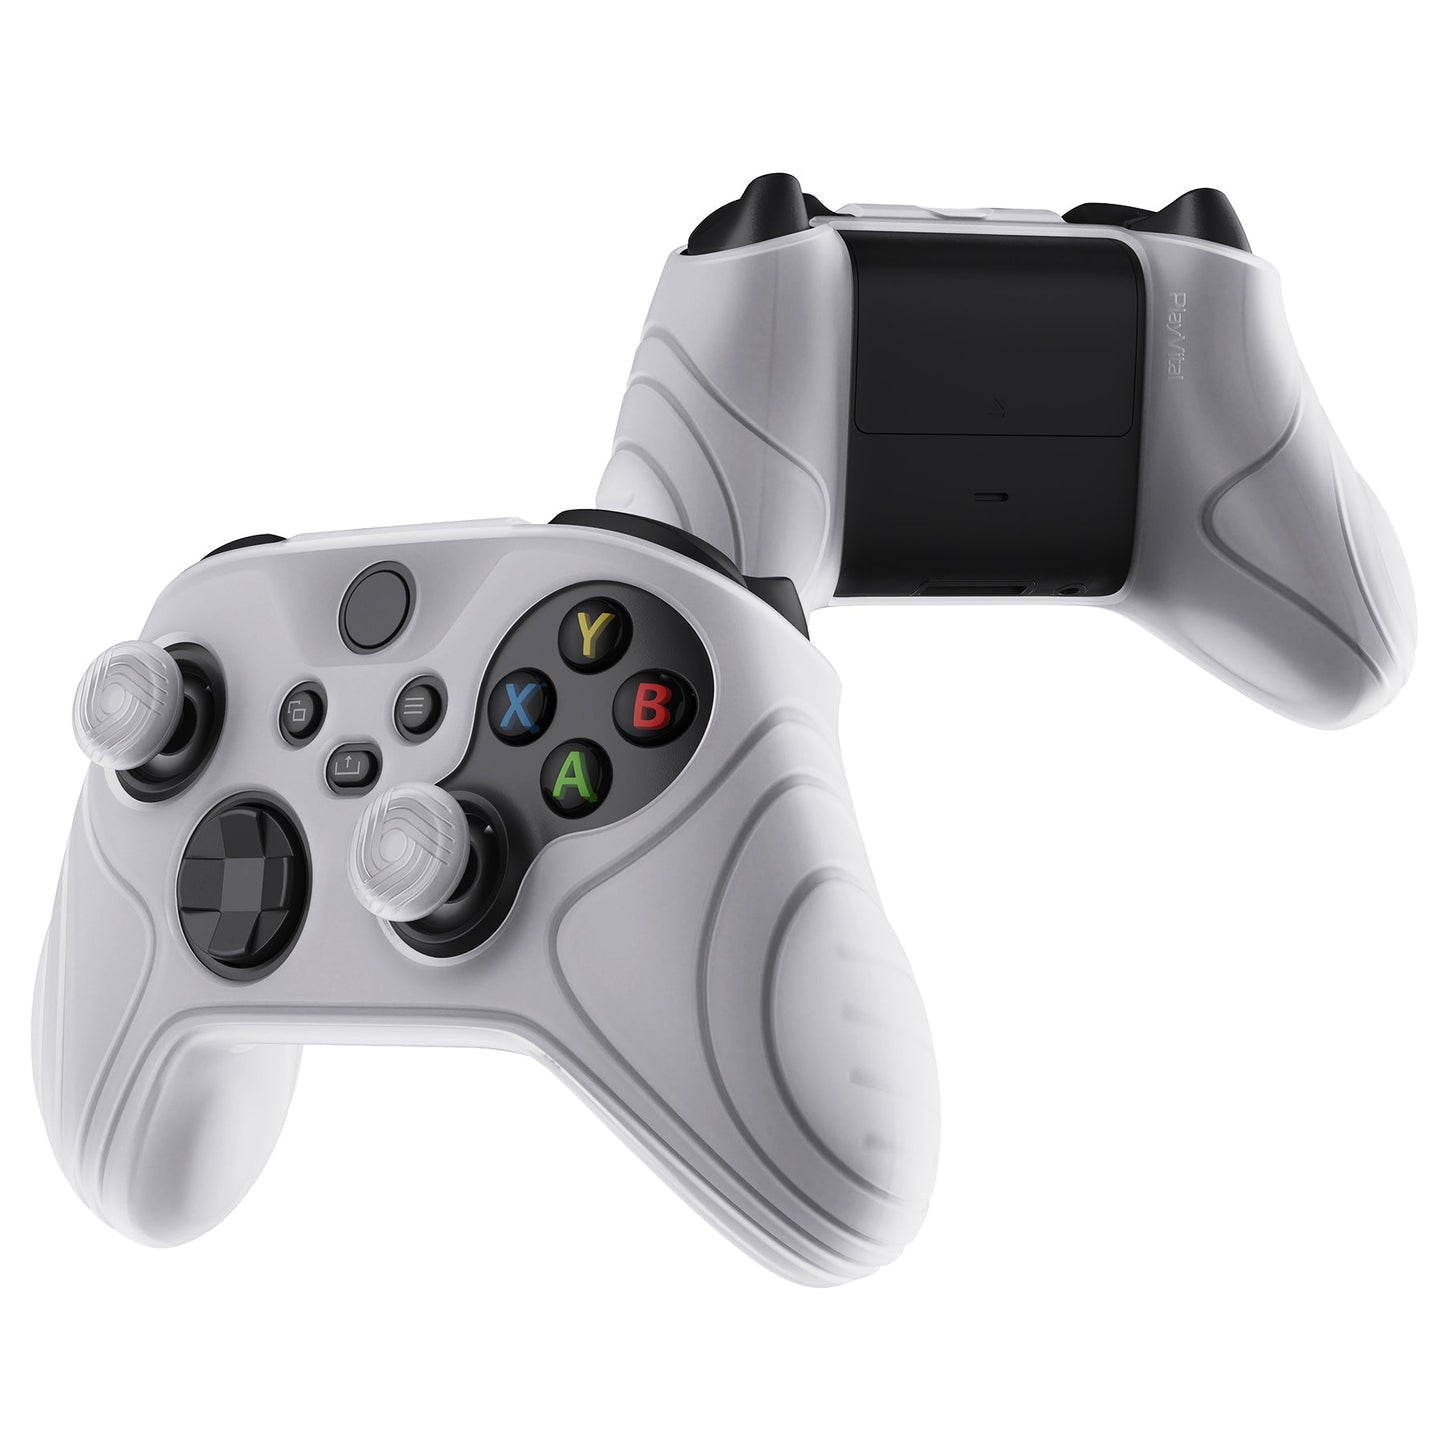 PlayVital Samurai Edition Clear White Anti-slip Controller Grip Silicone Skin, Ergonomic Soft Rubber Protective Case Cover for Xbox Series S/X Controller with Clear White Thumb Stick Caps - WAX3012 PlayVital